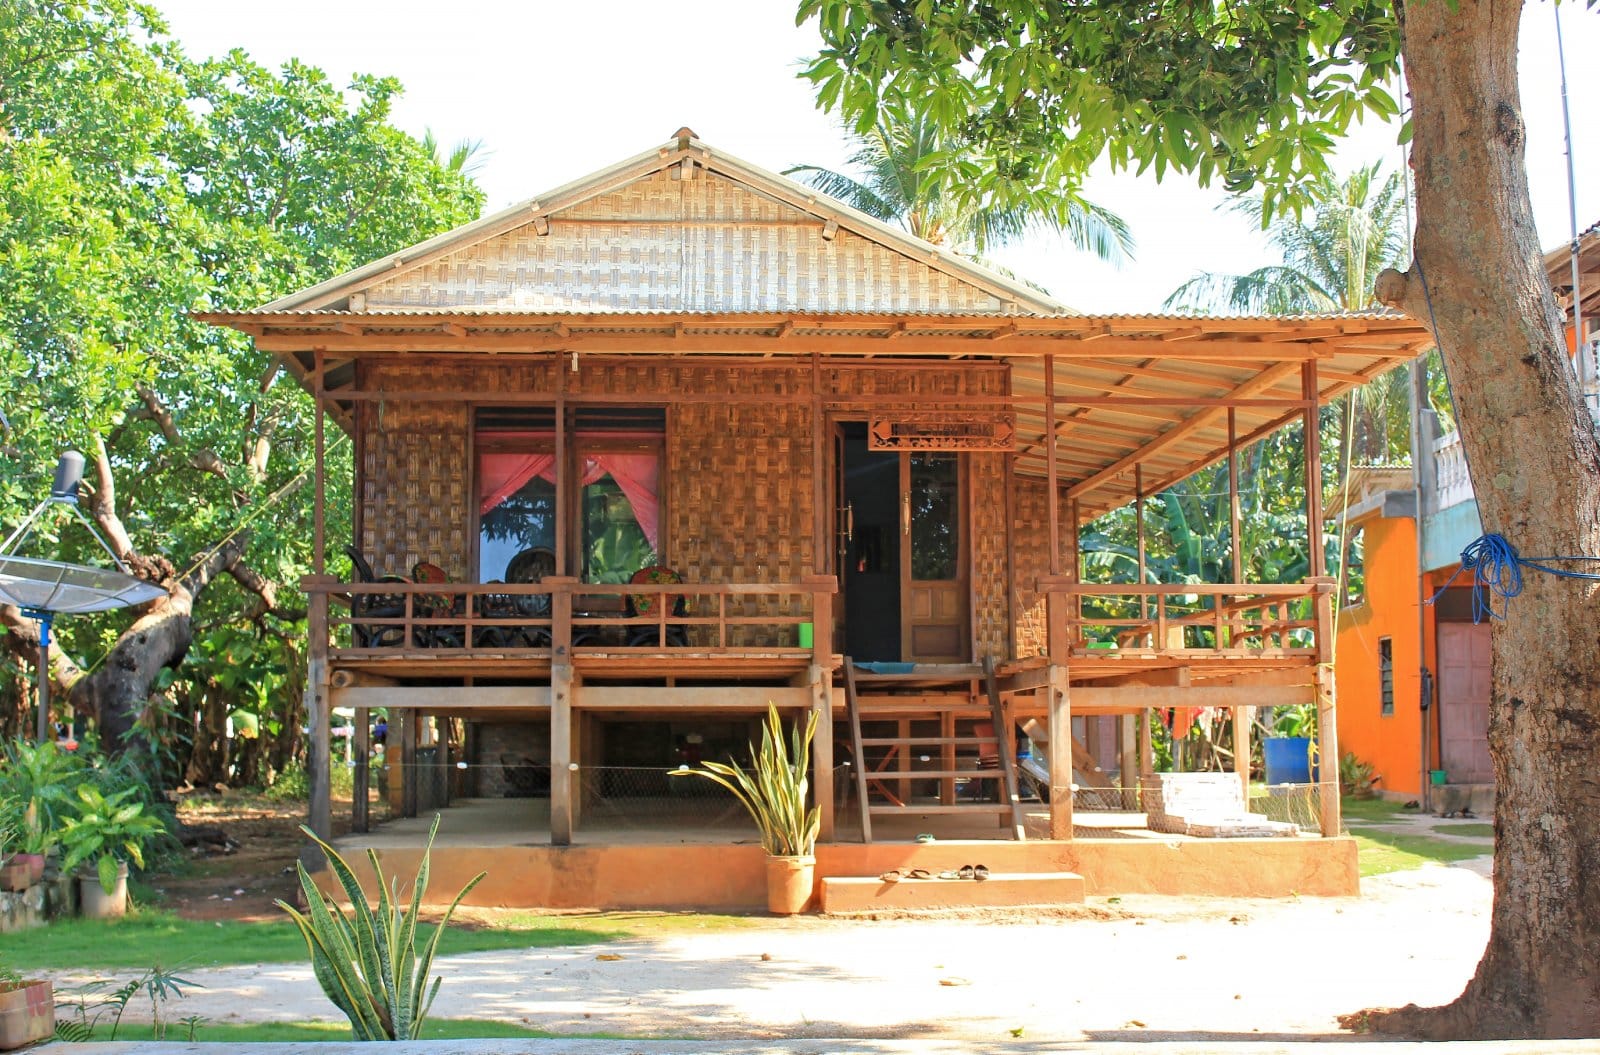 <p><span>Eco-friendly accommodation rentals offer a sustainable alternative for city stays. These accommodations range from green-certified hotels to eco-conscious Airbnb rentals. They focus on reducing their environmental impact through using renewable energy sources, implementing water-saving measures, and providing eco-friendly amenities to guests.</span></p> <p><span>These places often feature recycled or upcycled decor, organic linens, and natural cleaning products. Choosing these accommodations ensures a comfortable stay and supports sustainable tourism practices within the city.</span></p> <p><b>Insider’s Tip: </b><span>Look for rentals with green certifications or that list their sustainable practices in their descriptions.</span></p> <p><b>How To Get There: </b><span>Most eco-friendly accommodations are located within the city, accessible by public transportation, bike rentals, or even on foot, depending on their location.</span></p> <p><b>Best Time To Travel: </b><span>These accommodations are a great choice year-round; however, booking in advance is recommended, especially during peak travel seasons.</span></p>